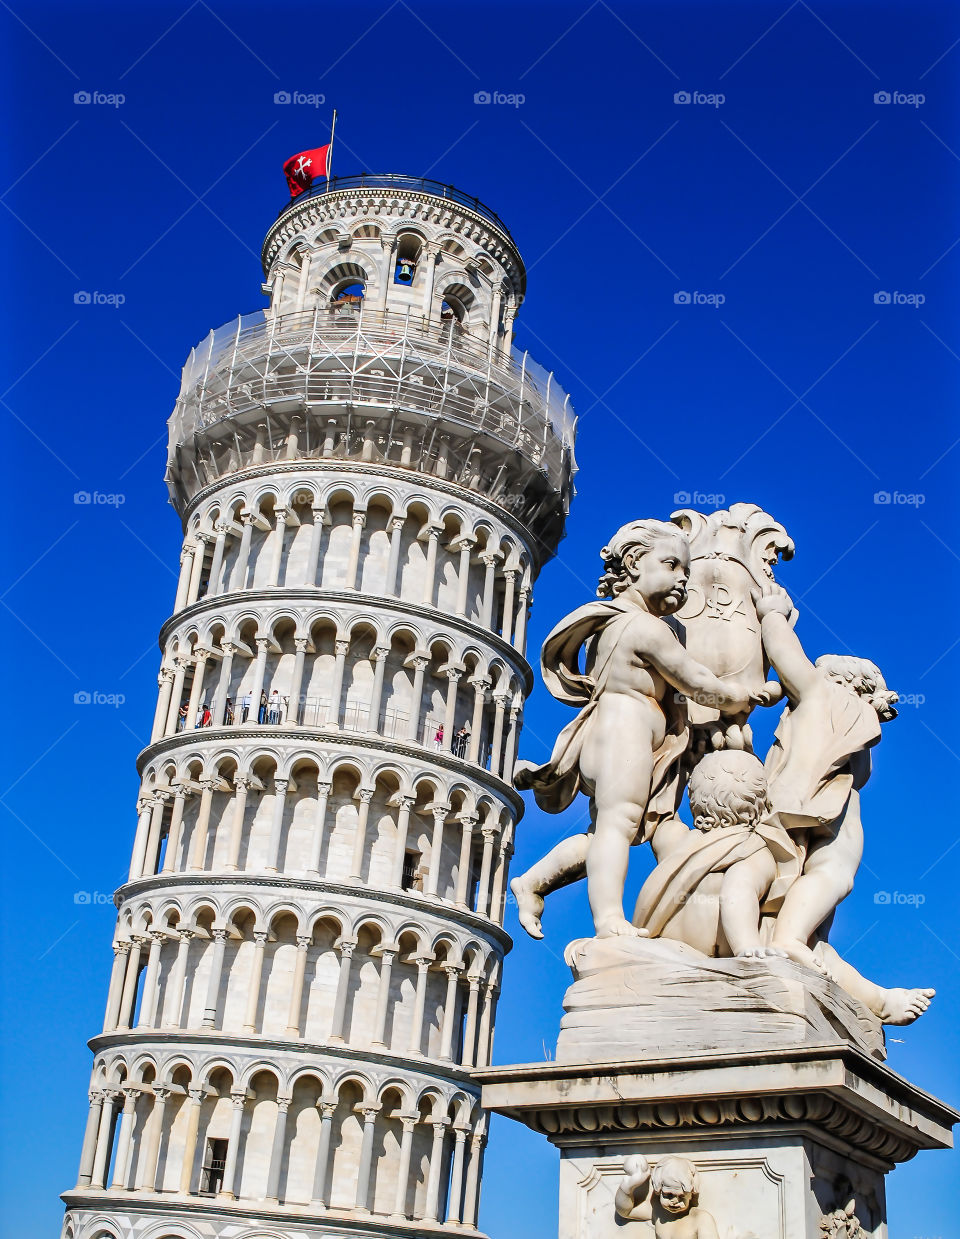 Beautiful statues near the Leaning Tower of Pisa, Italy